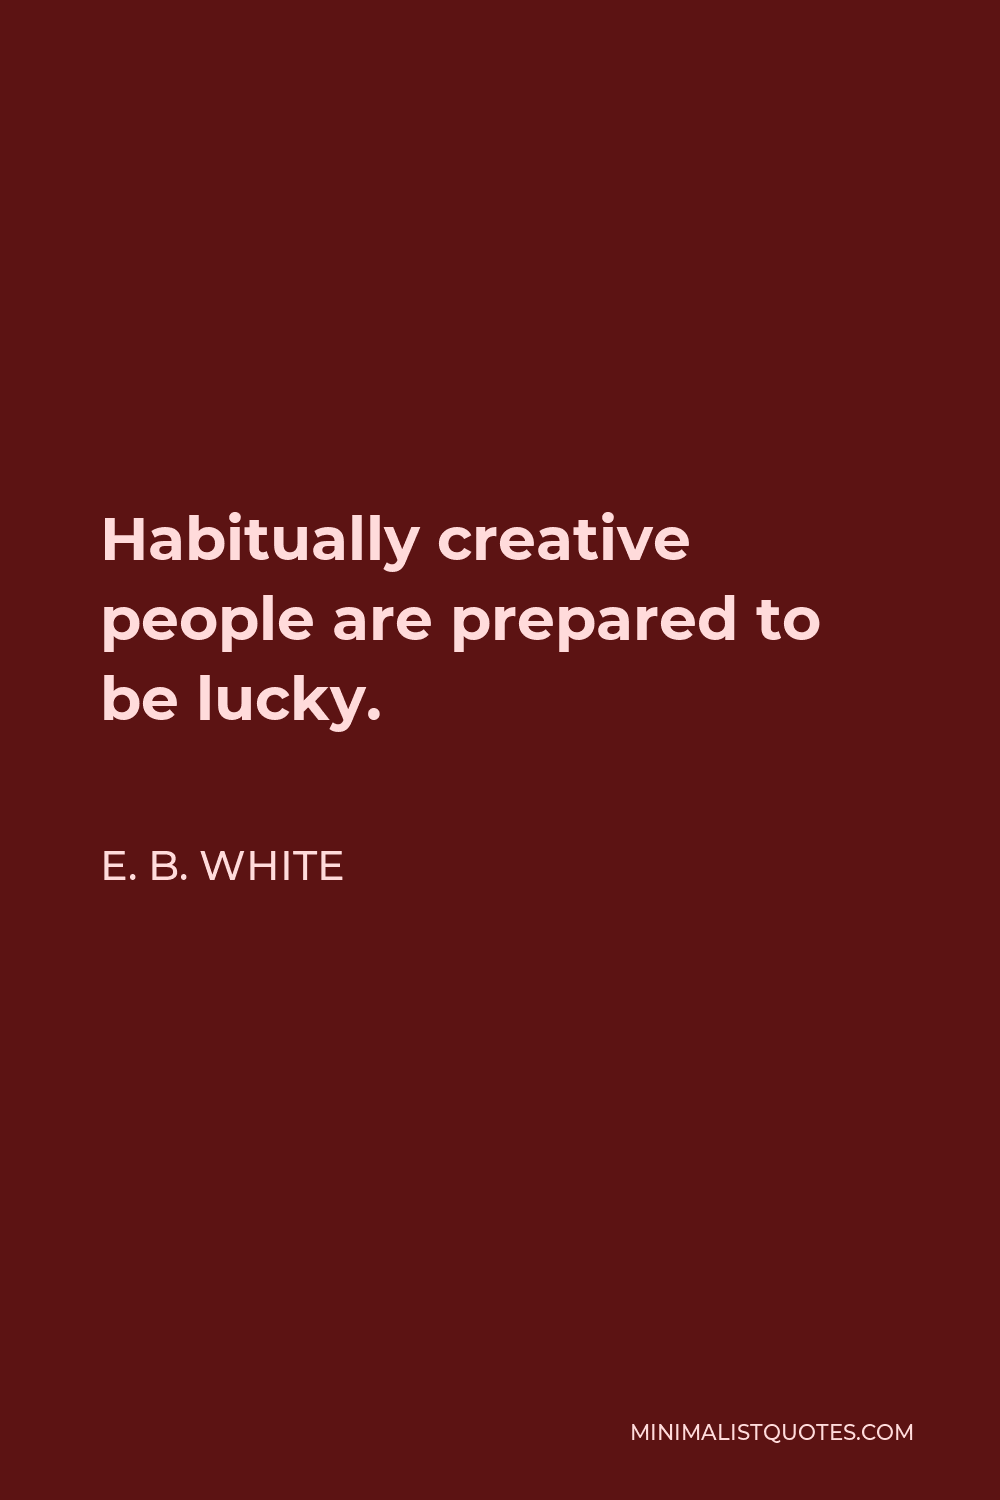 E. B. White Quote - Habitually creative people are prepared to be lucky.